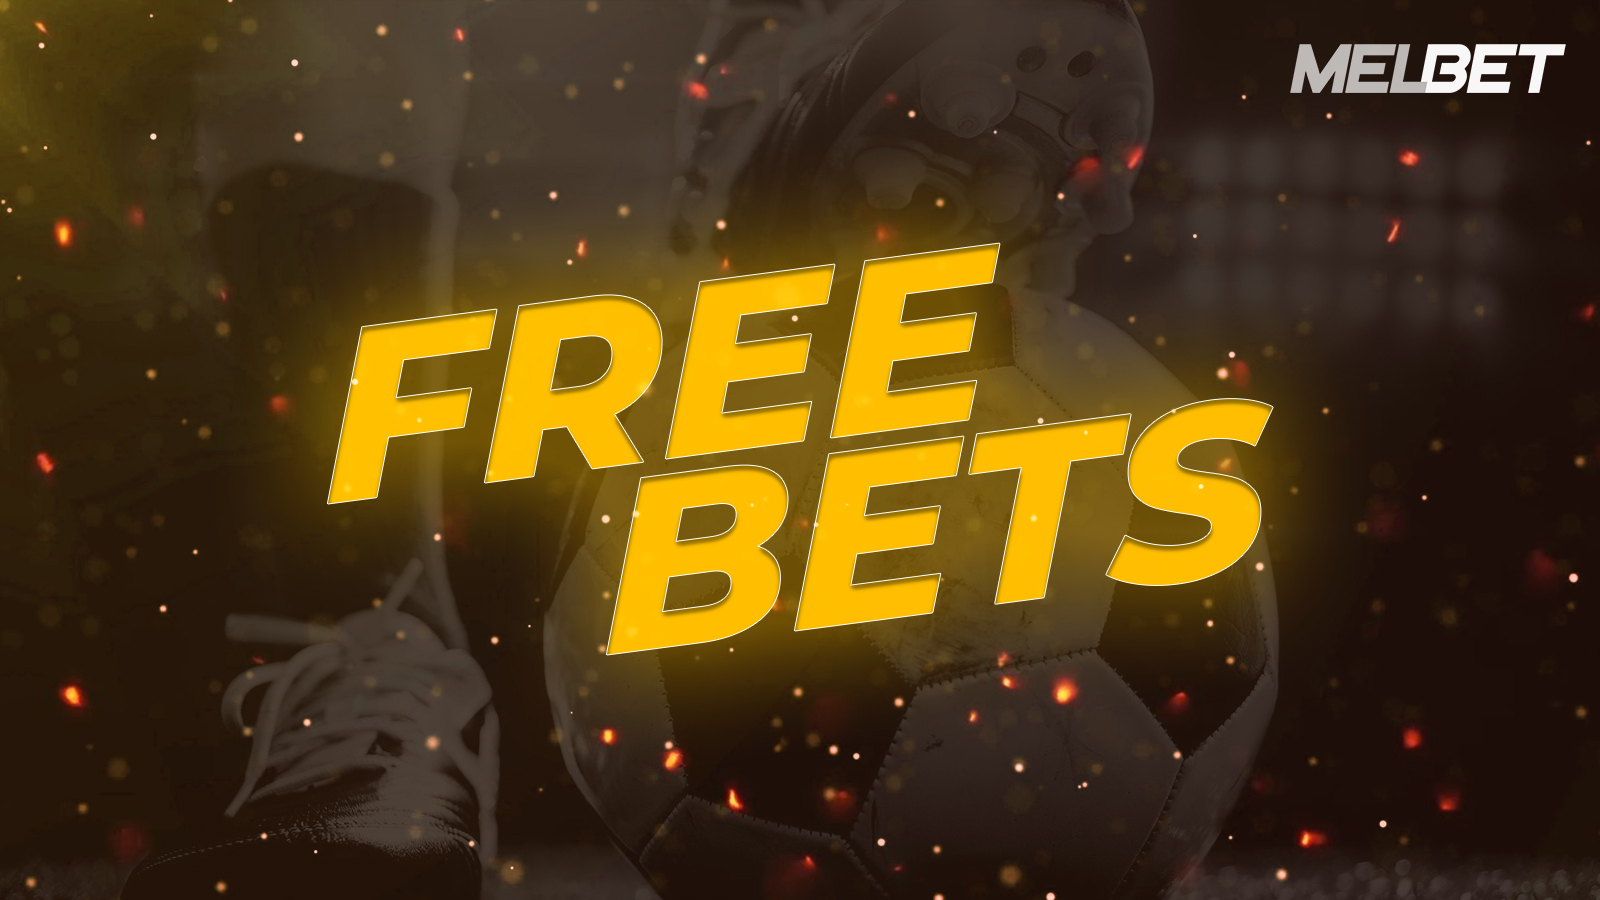 You can spend you free bets on cricket betting at Melbet.